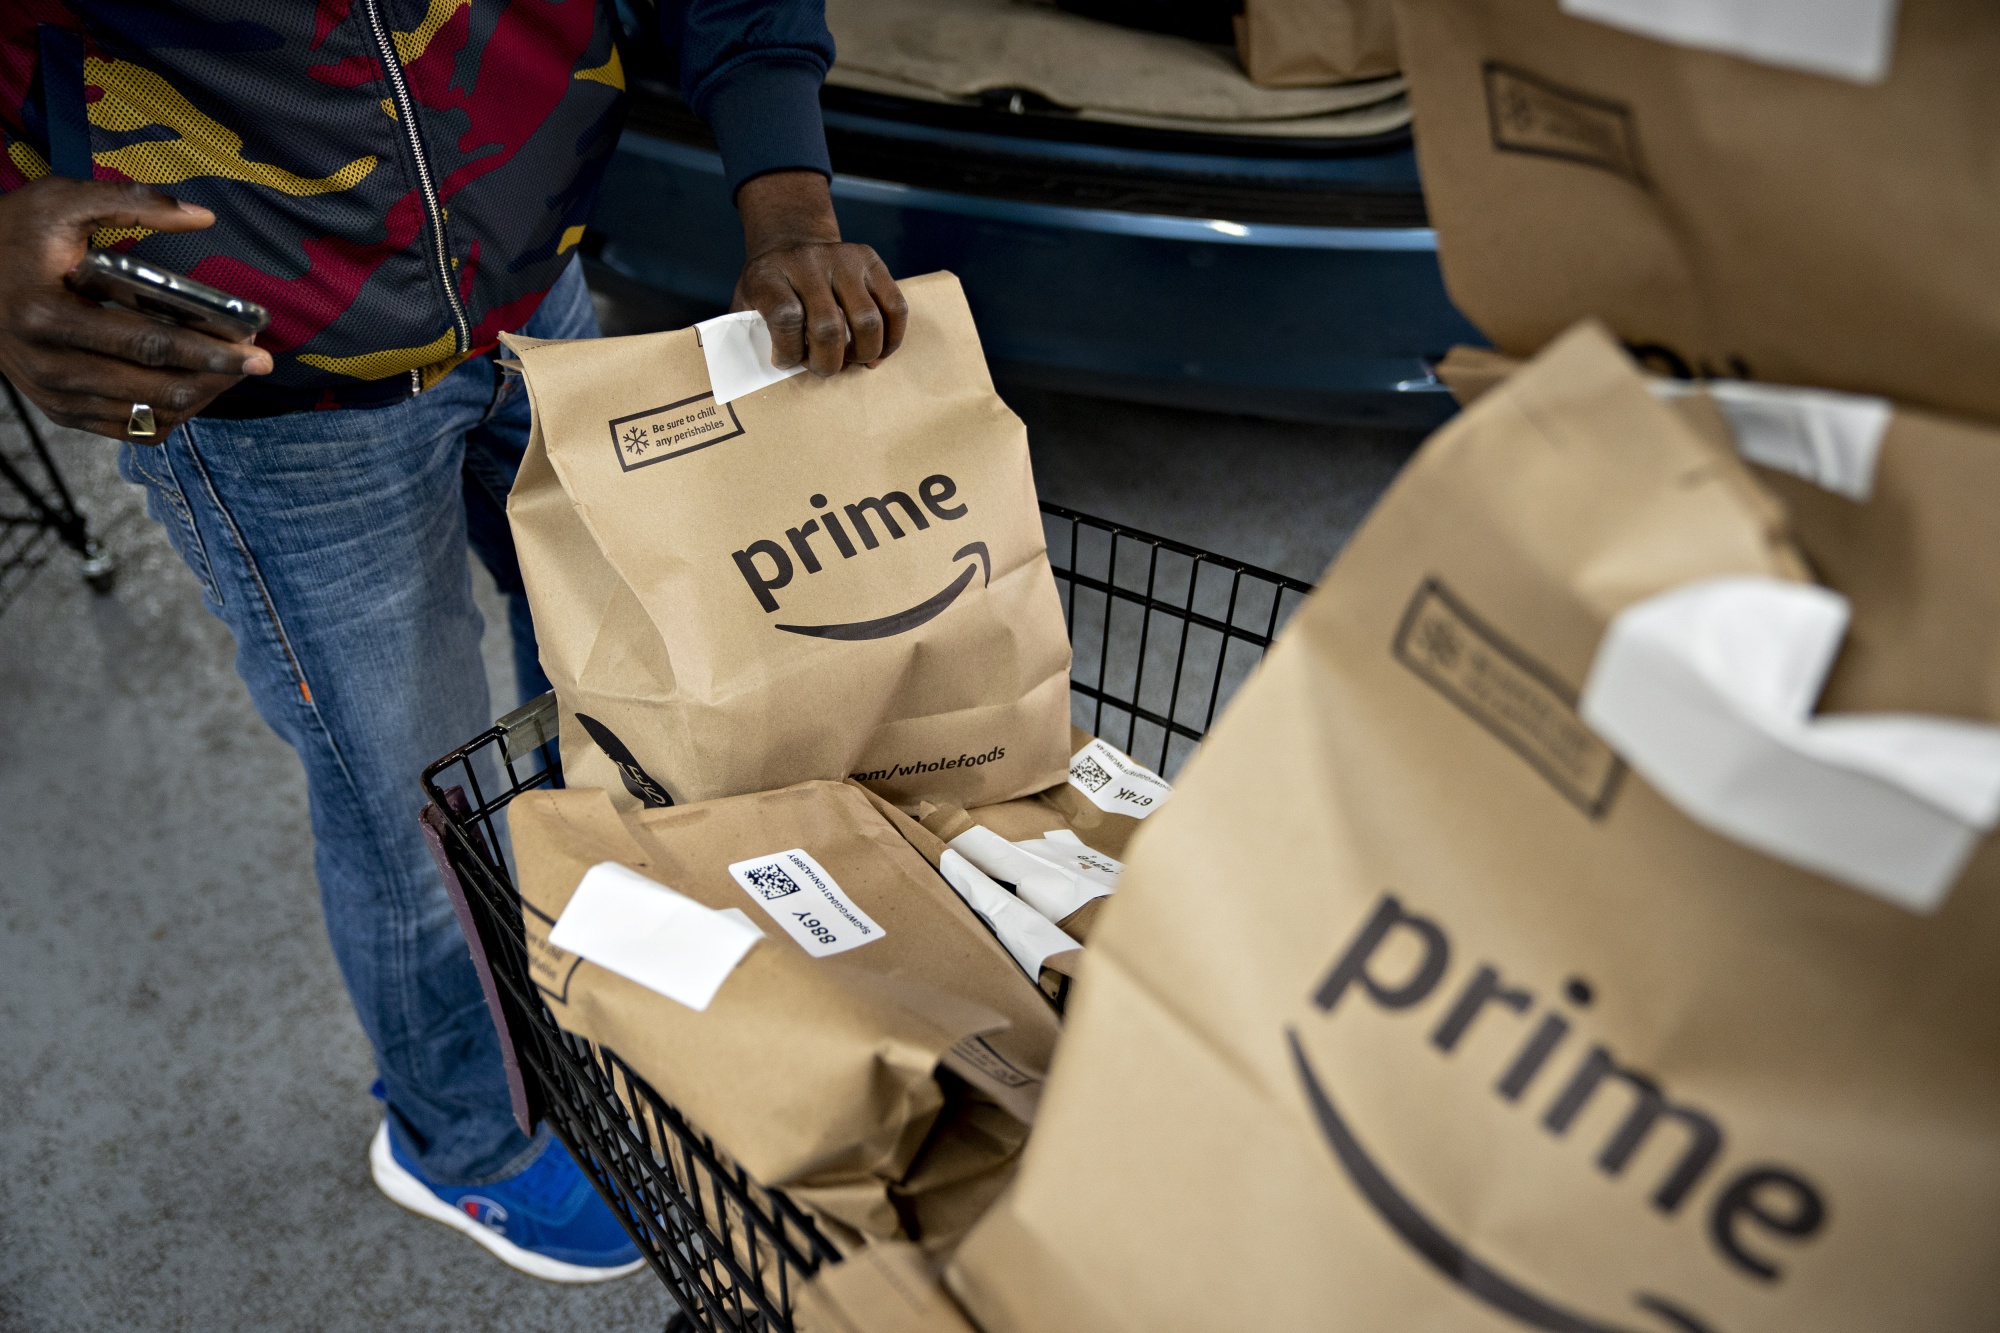 Amazon.com Inc. Prime Deliveries As Workers Demand Better Pay